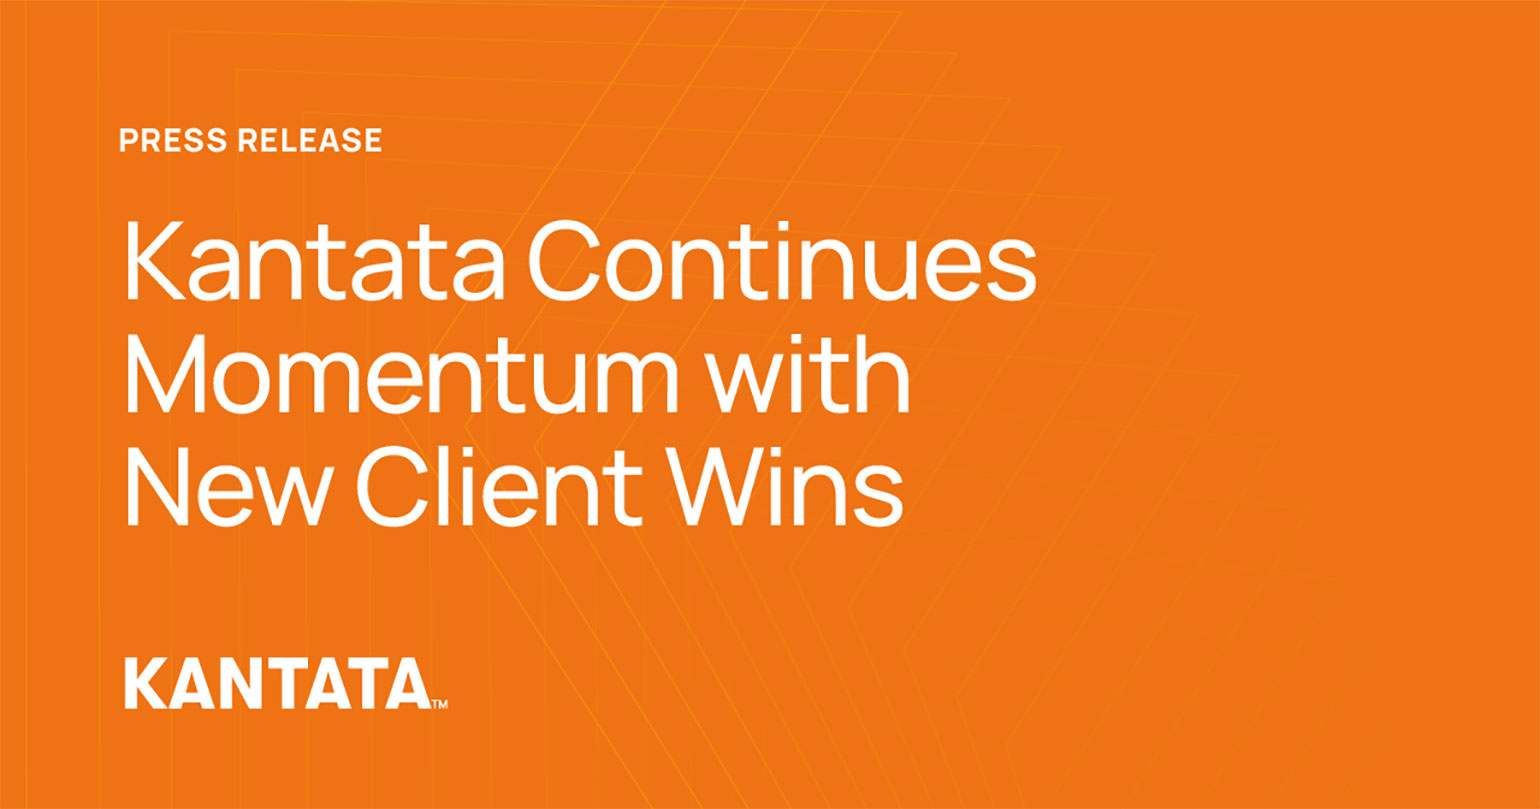 Kantata Continues Momentum with New Client Wins